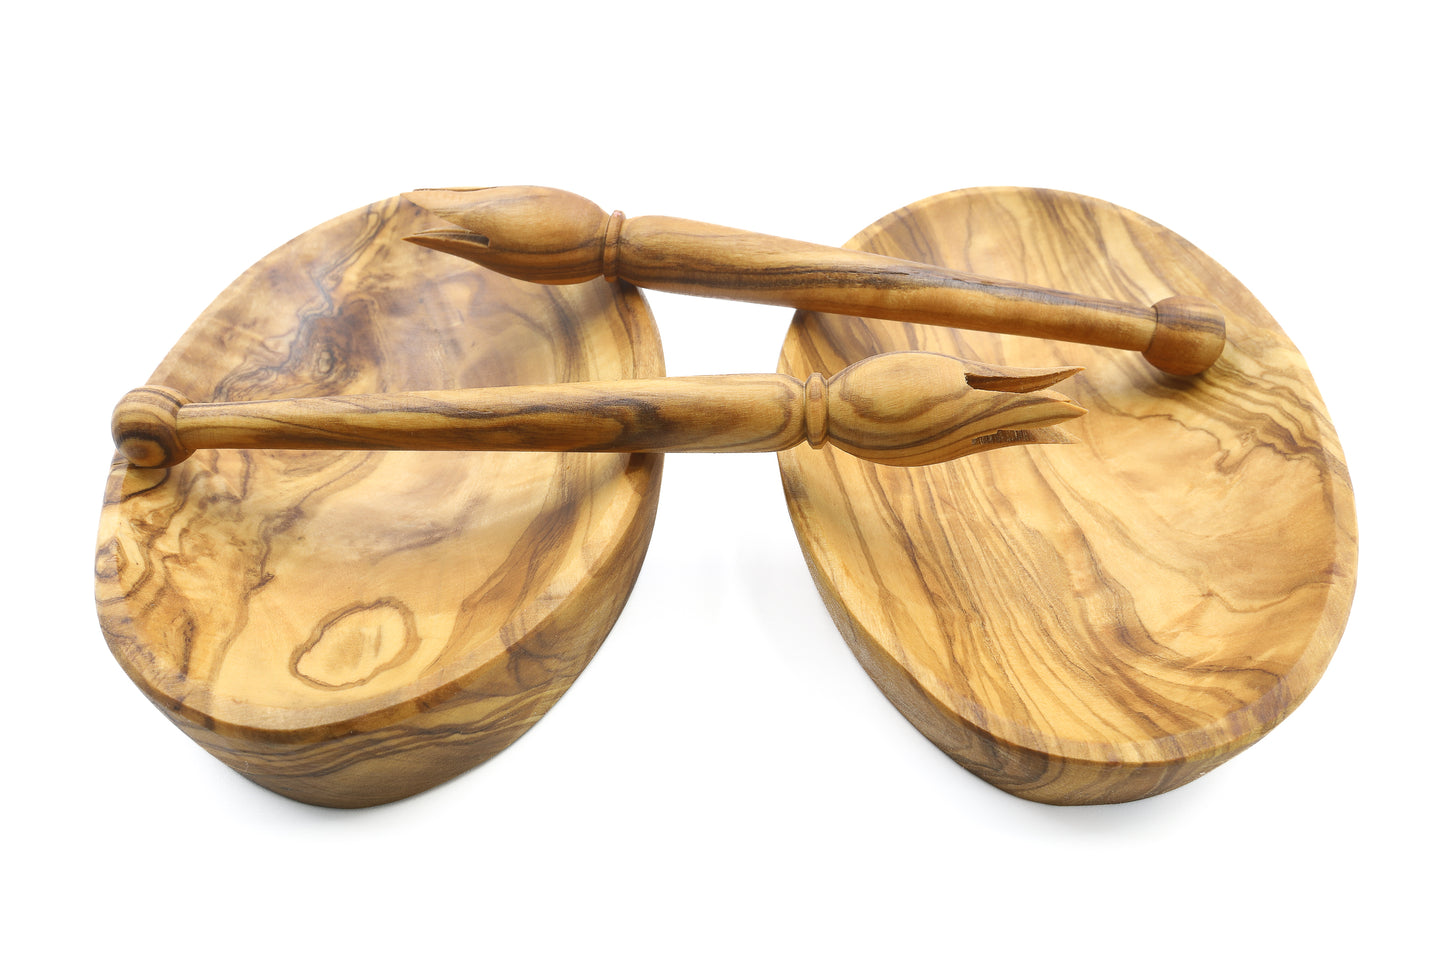 Handmade oval bowl and olive picker duo, showcasing the beauty of olive wood